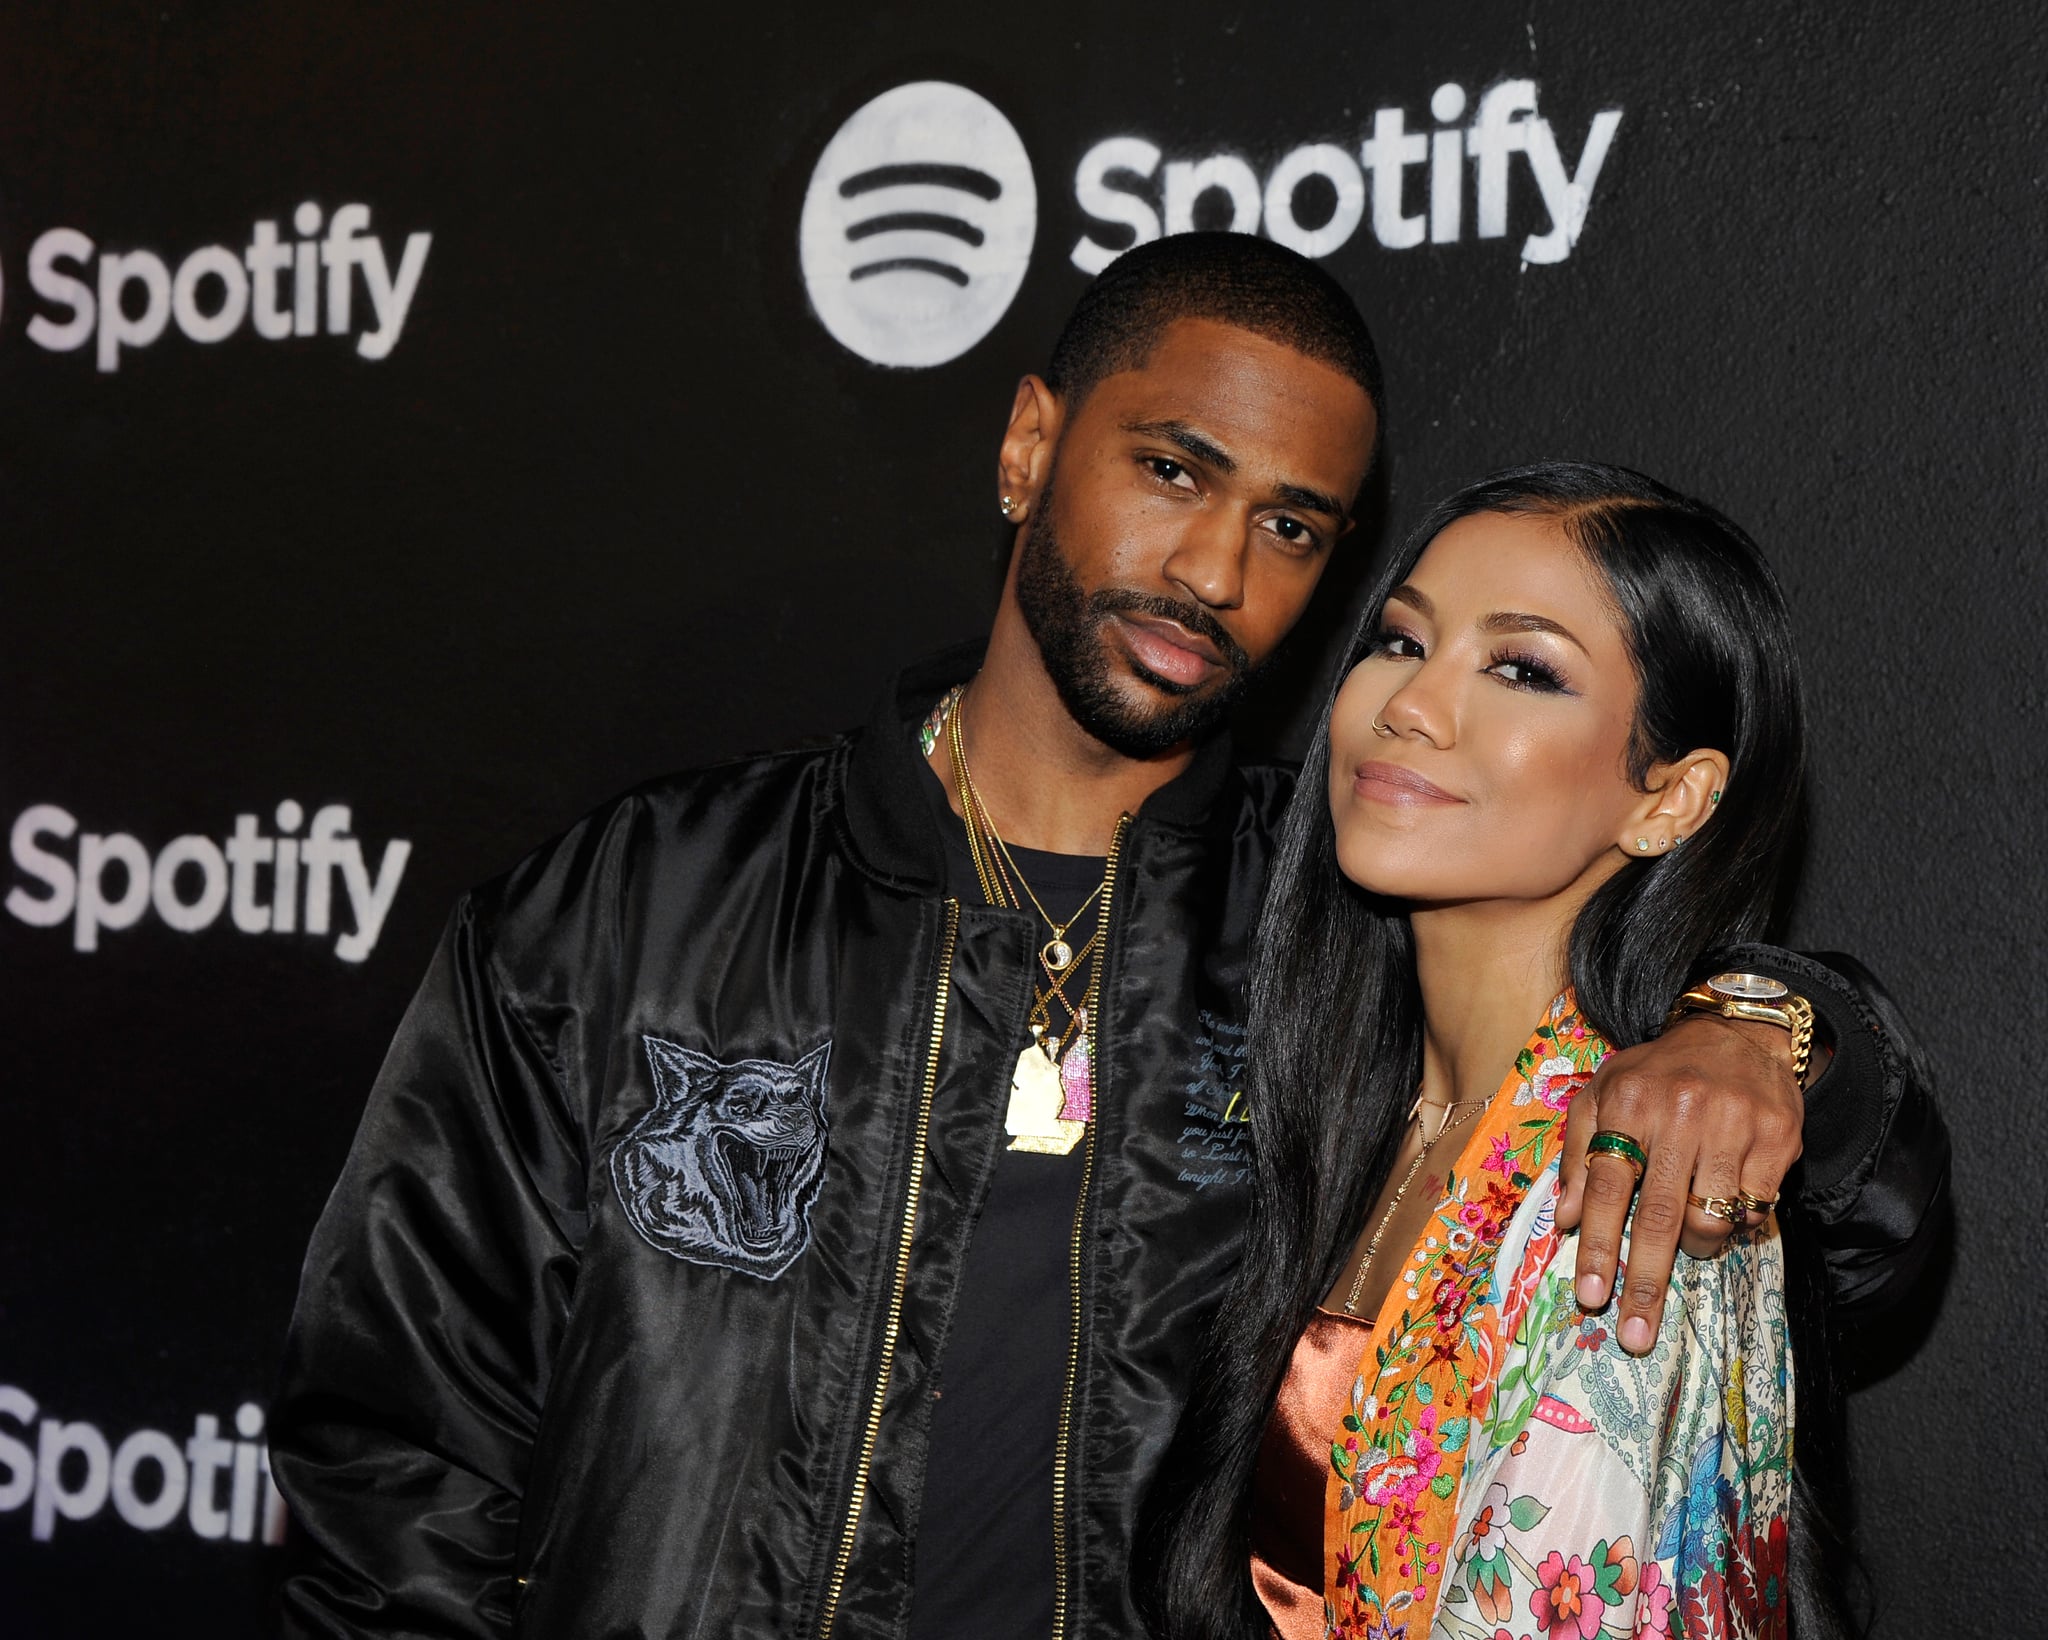 LOS ANGELES, CA - FEBRUARY 09:  Rapper Big Sean and singer Jhene Aiko attend the Spotify Best New Artist Nominees celebration at Belasco Theatre on 9, 2017 in Los Angeles, California.  (Photo by John Sciulli/Getty Images for Spotify)